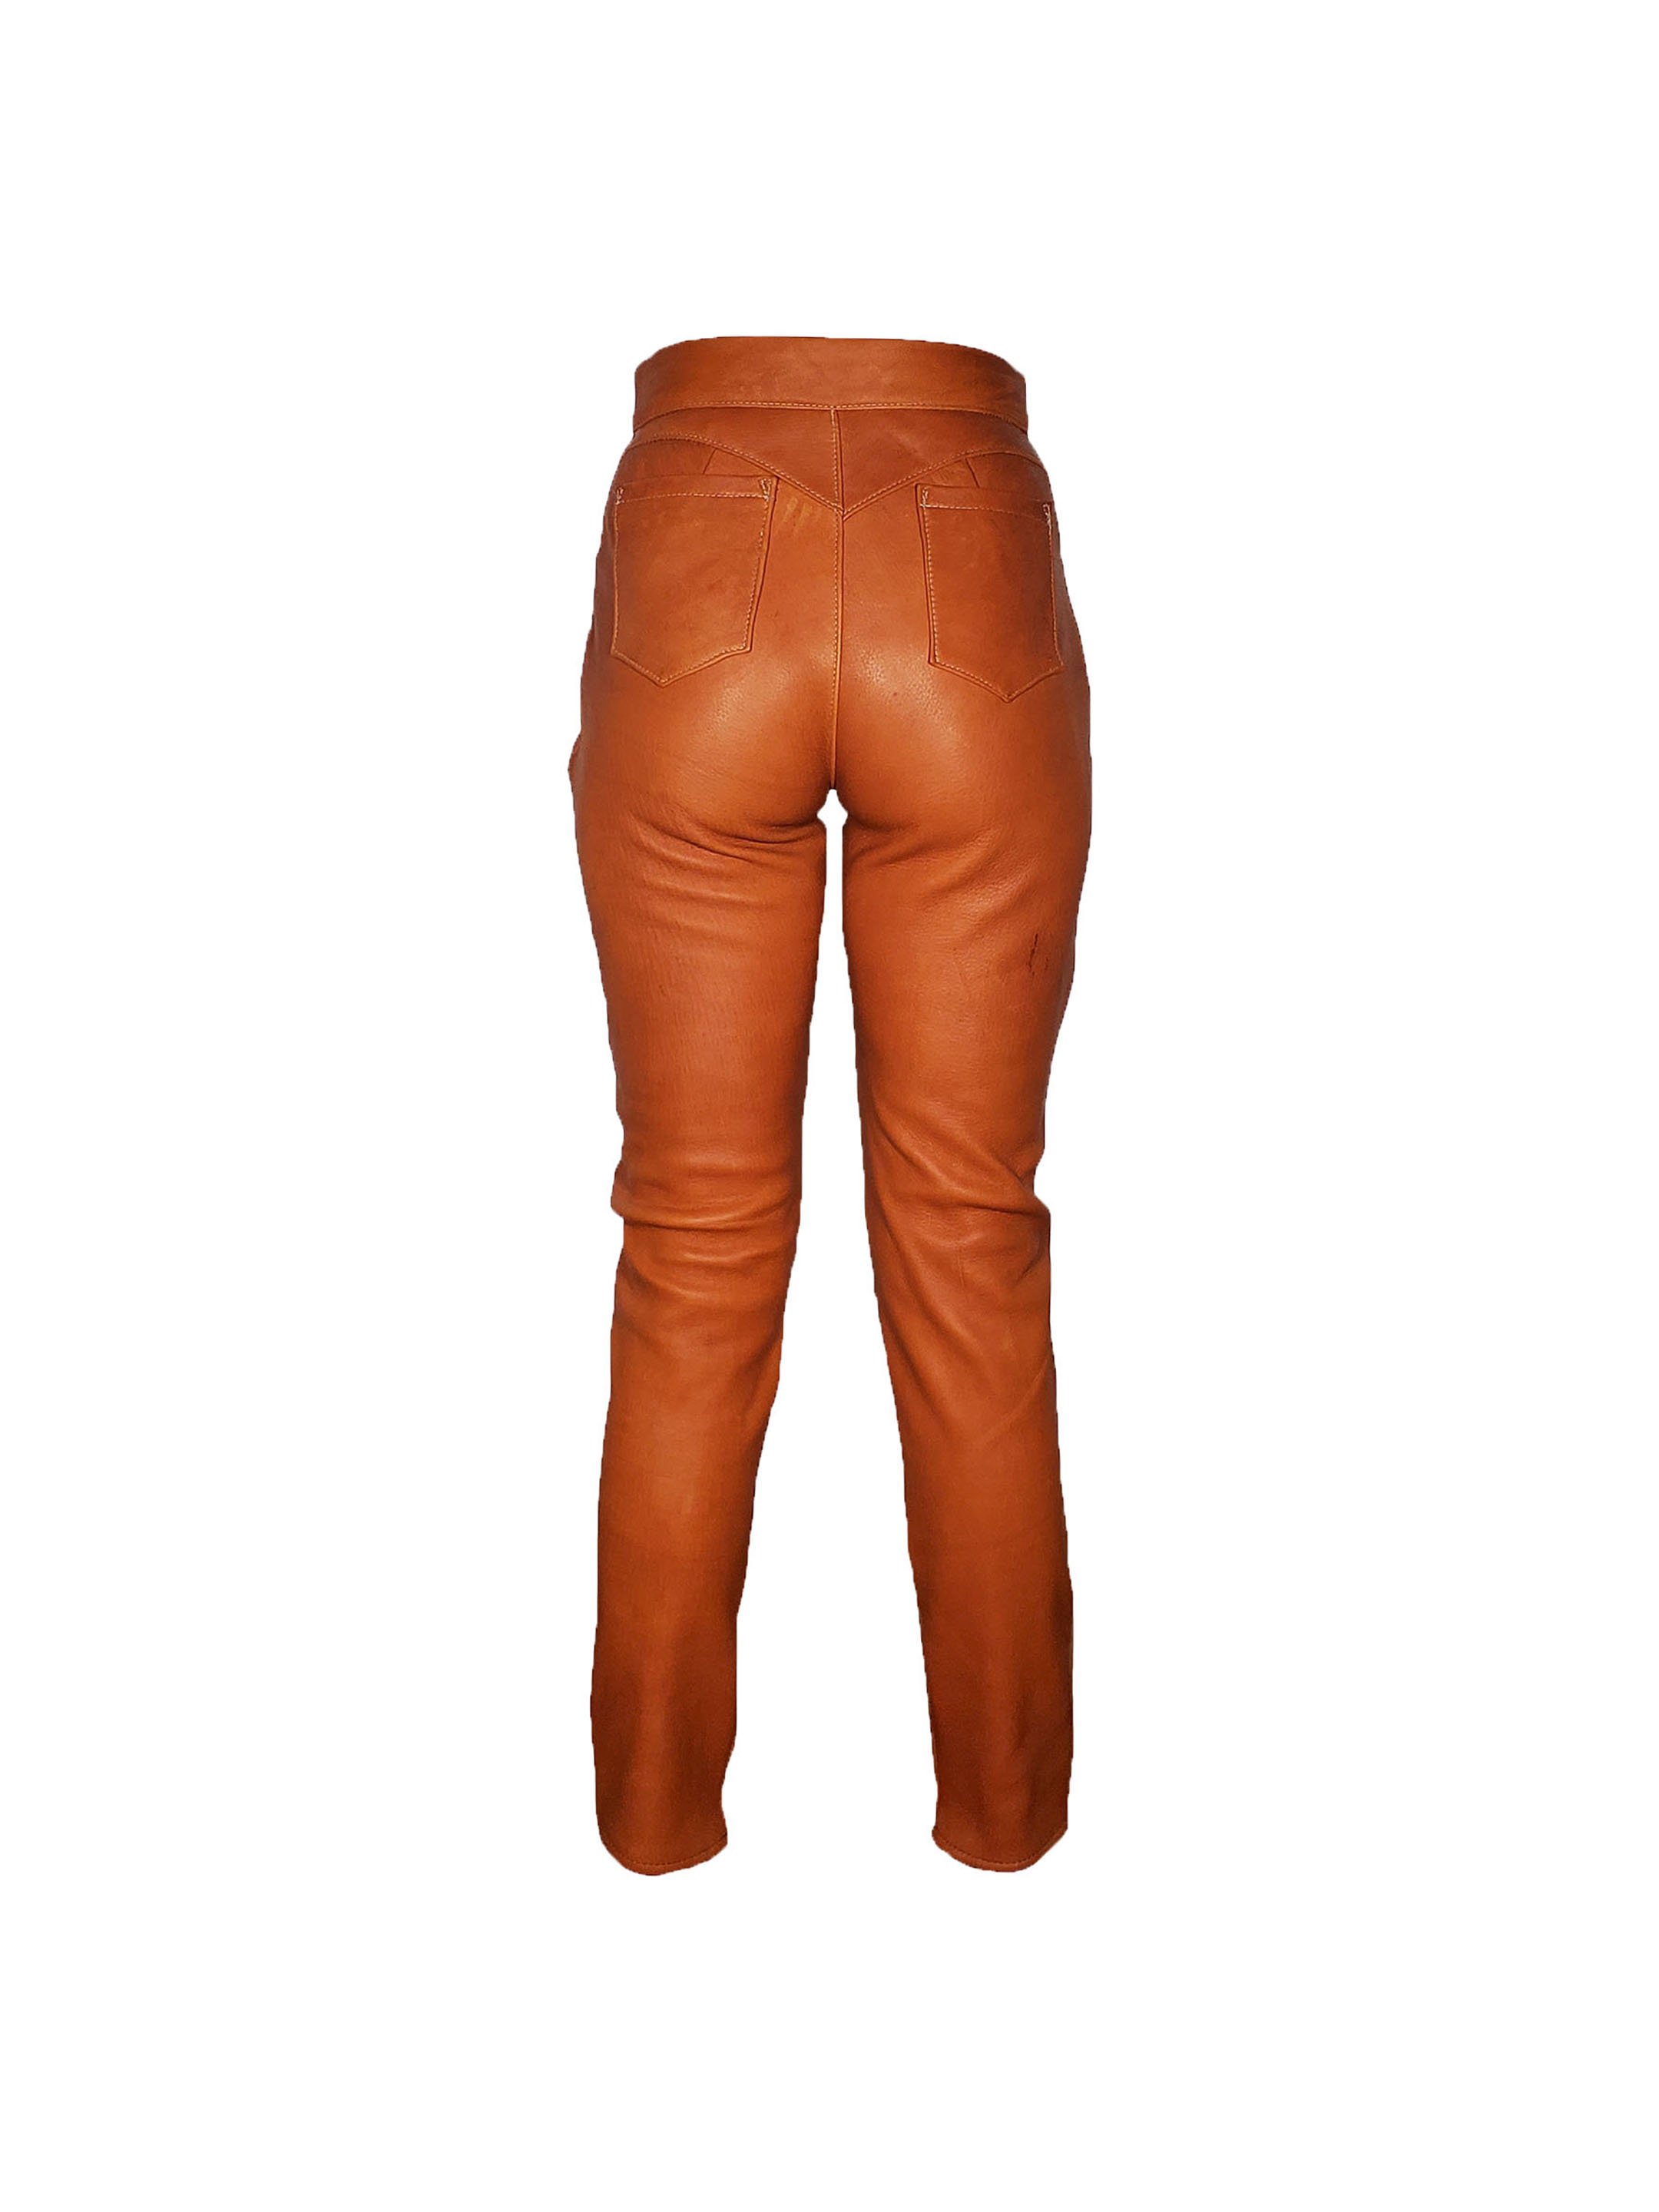 Hand-Stitched Leather Lace-up Pant — Leatheracci